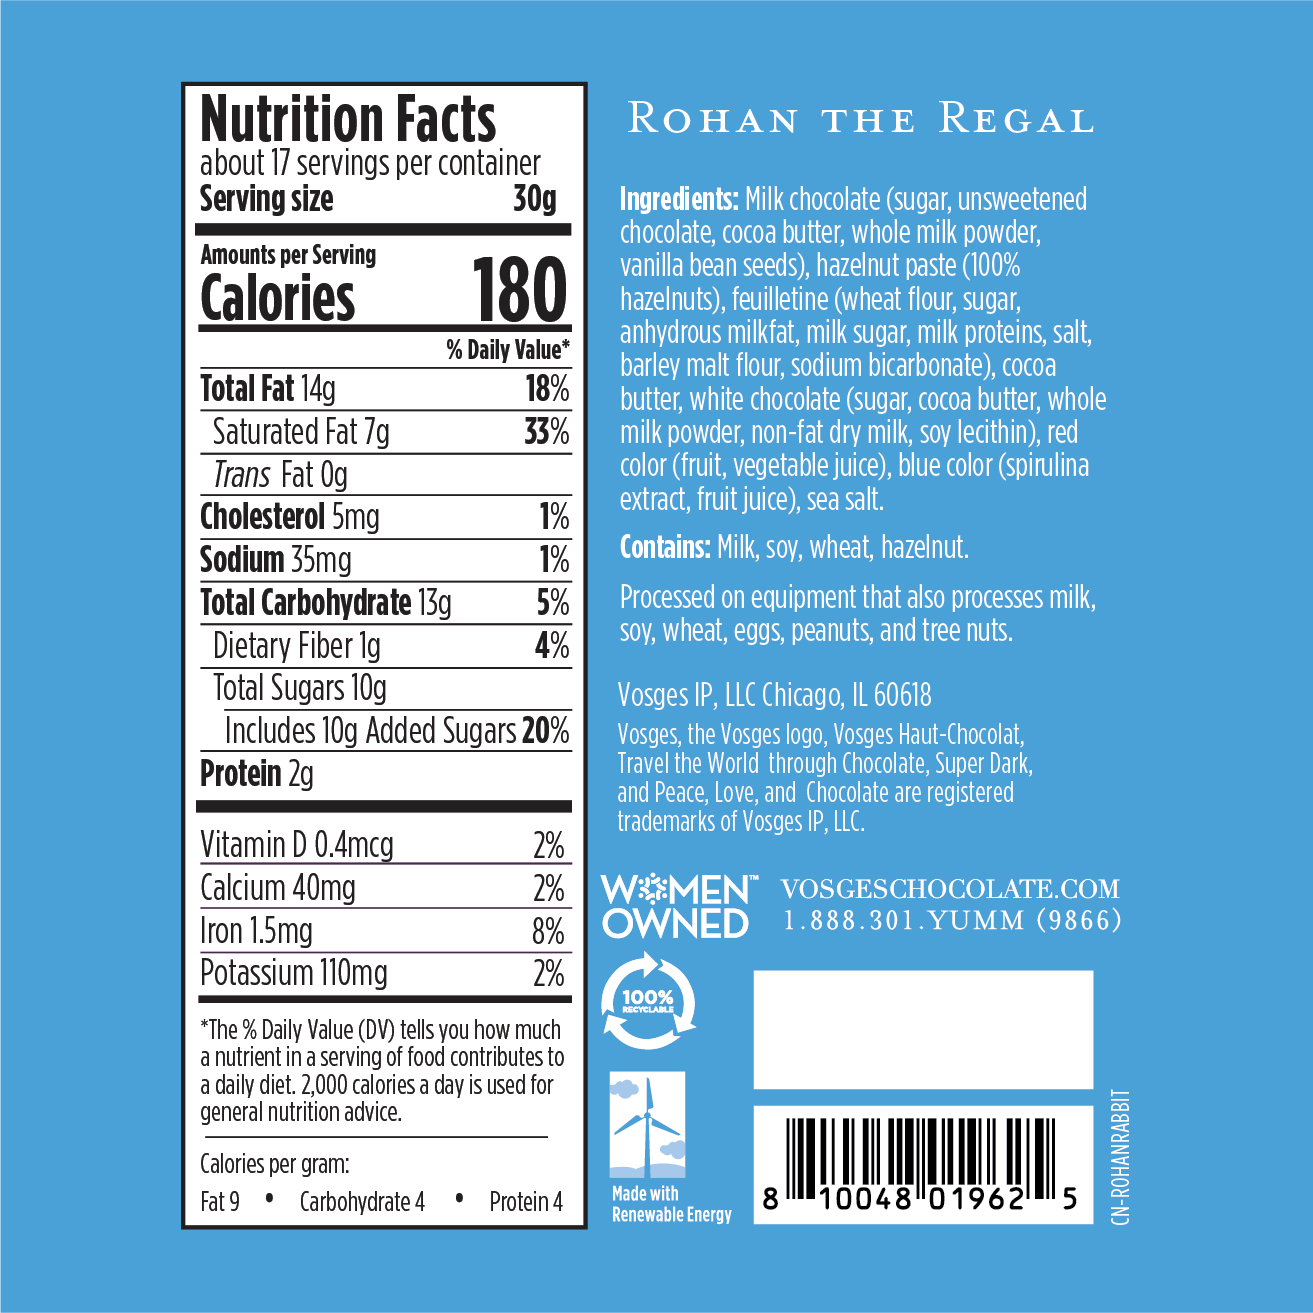 Nutrition Facts and Ingredients of Vosges Haut-Chocolat Rohan the Regal Rabbit in white, san-serif font on a sky blue background.  